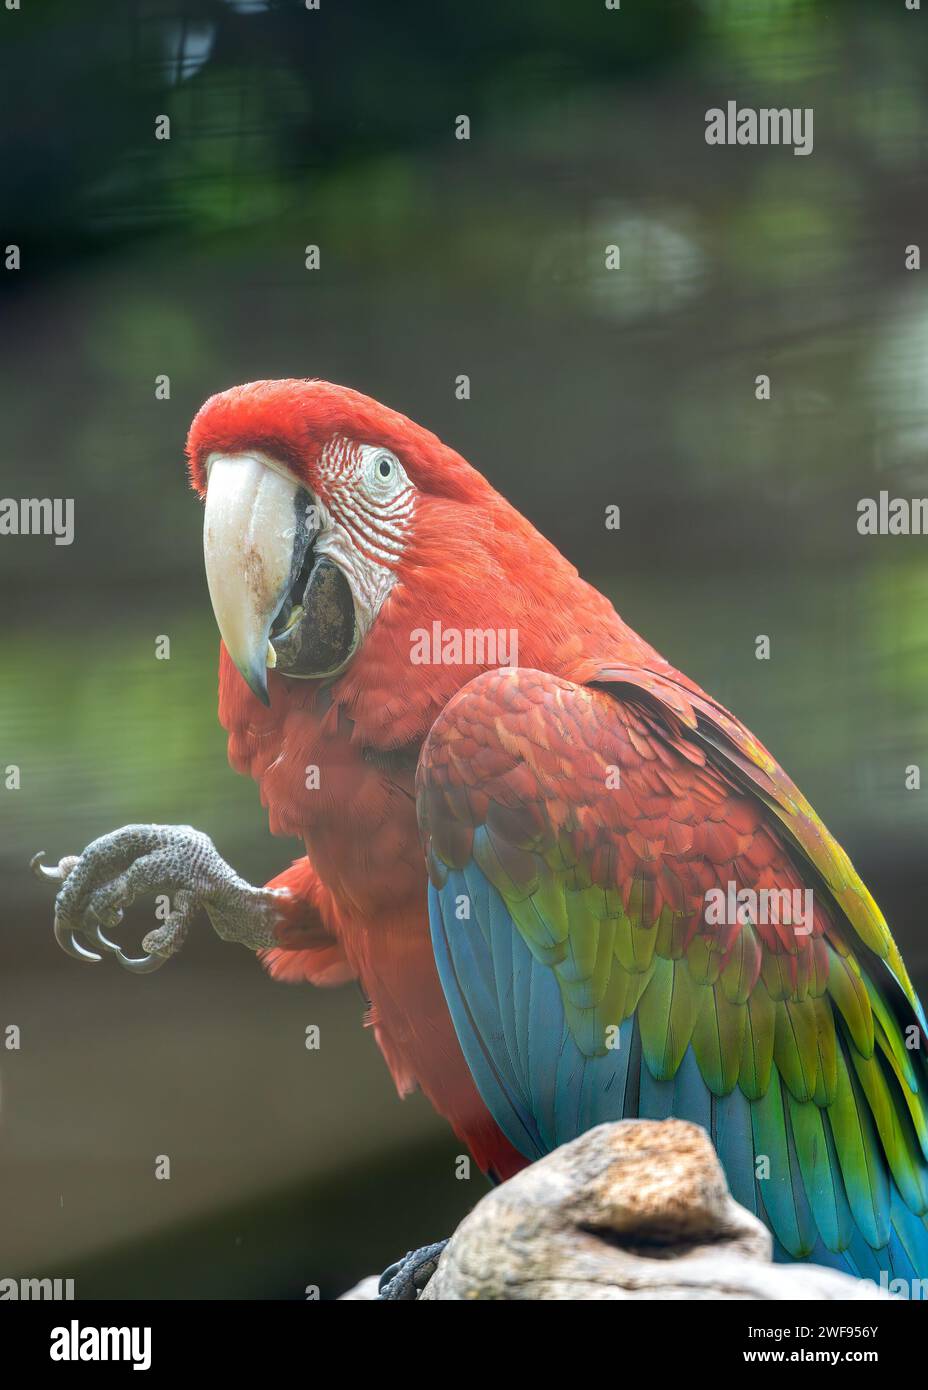 Striking Red-and-Green Macaw, Ara chloropterus, soaring through the vibrant hues of the Amazon Rainforest, a symbol of South American biodiversity. Stock Photo